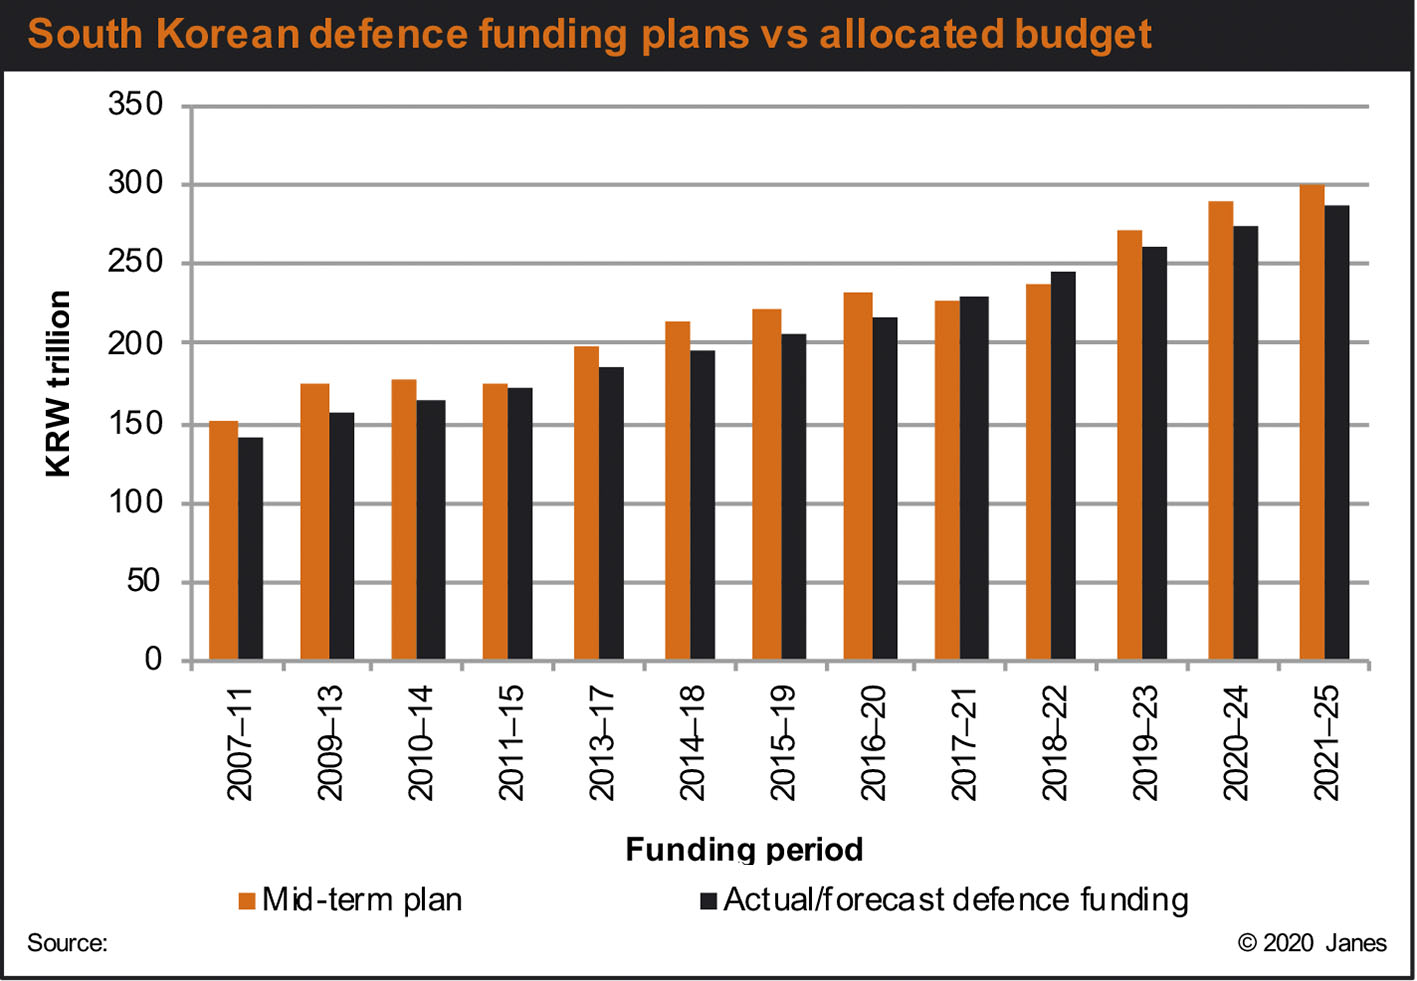 As this graph illustrates, South Korea has a history of failing to meet the spending targets outlined in its mid-term defence plans. Since 2010 actual funding has been 6% lower, on average, than the plans. (Janes)